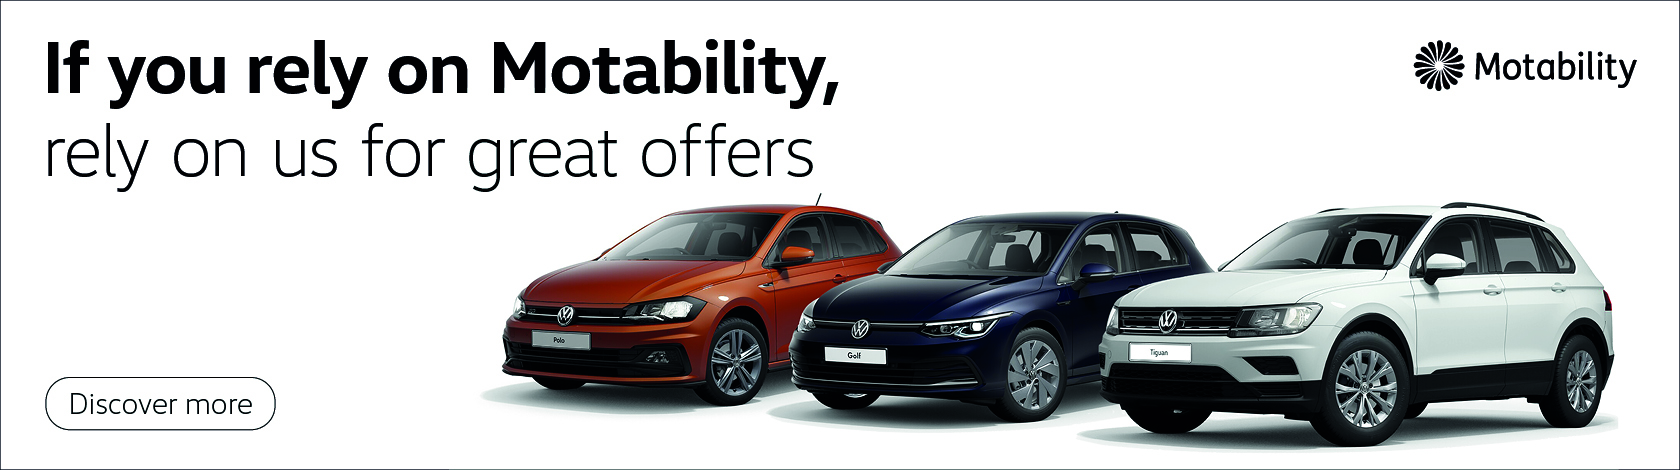 rely on us for motability